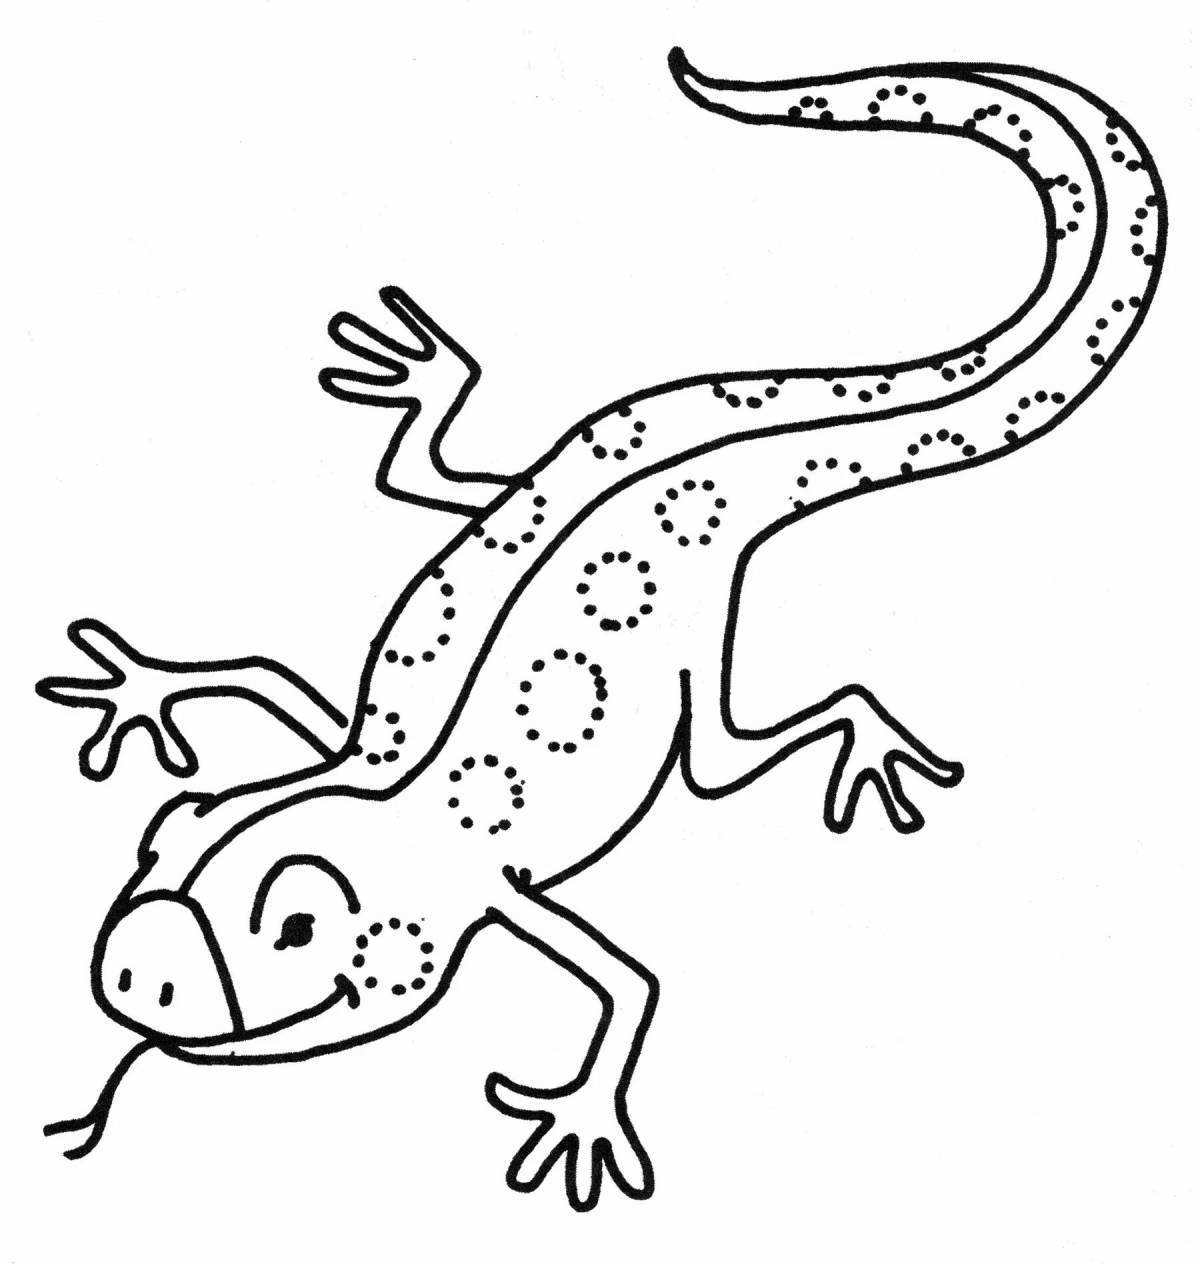 Bright lizard coloring book for kids